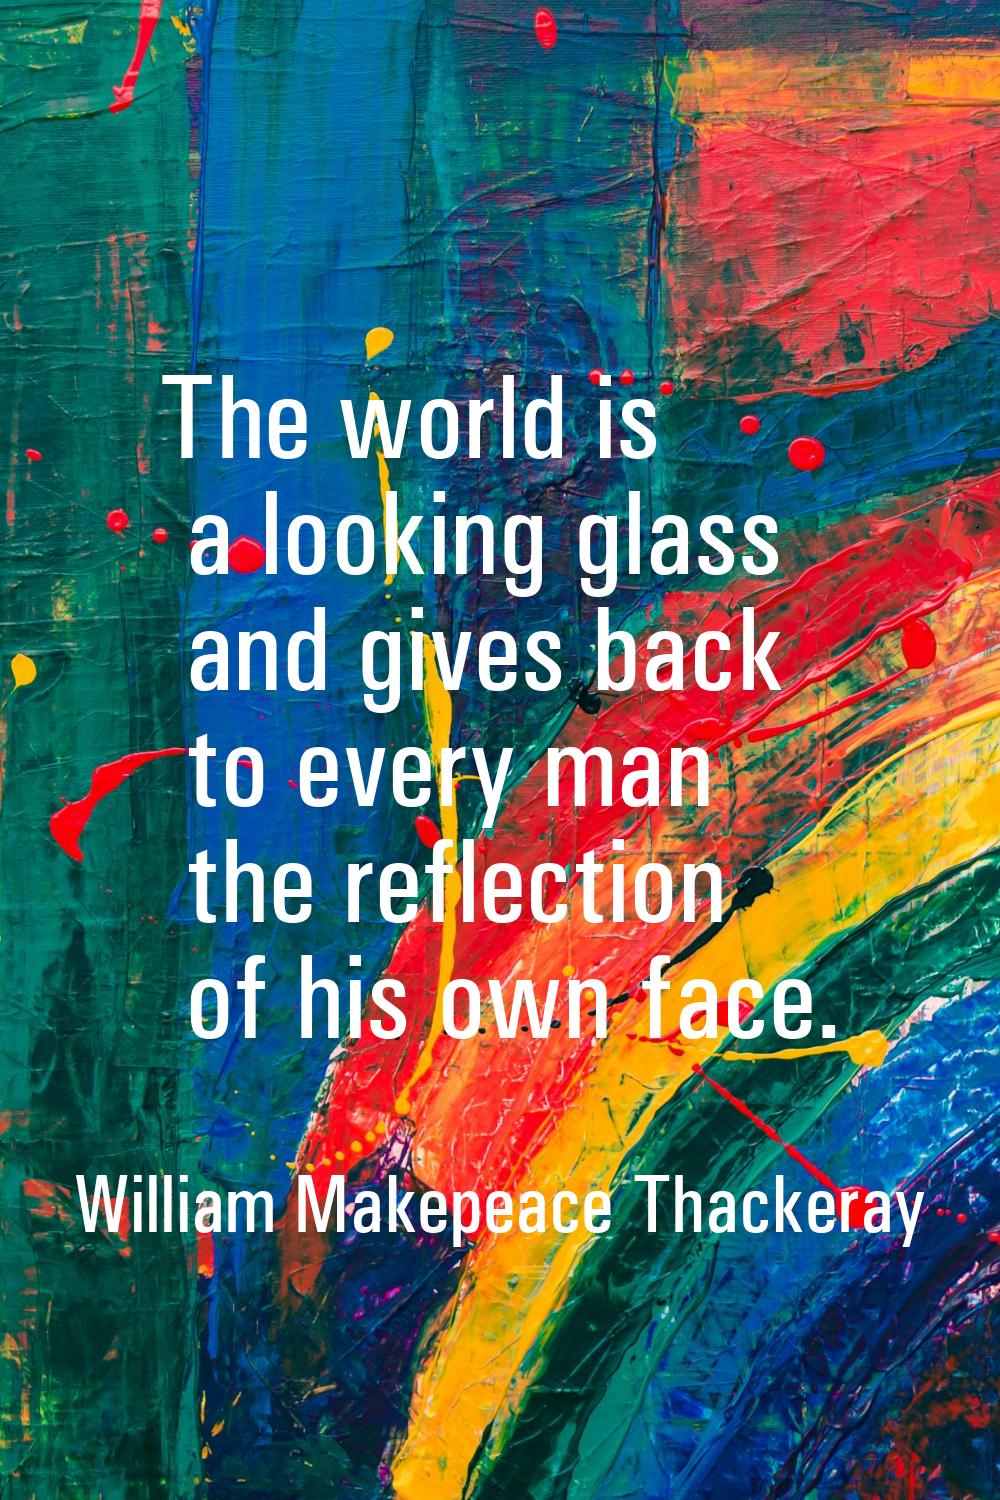 The world is a looking glass and gives back to every man the reflection of his own face.